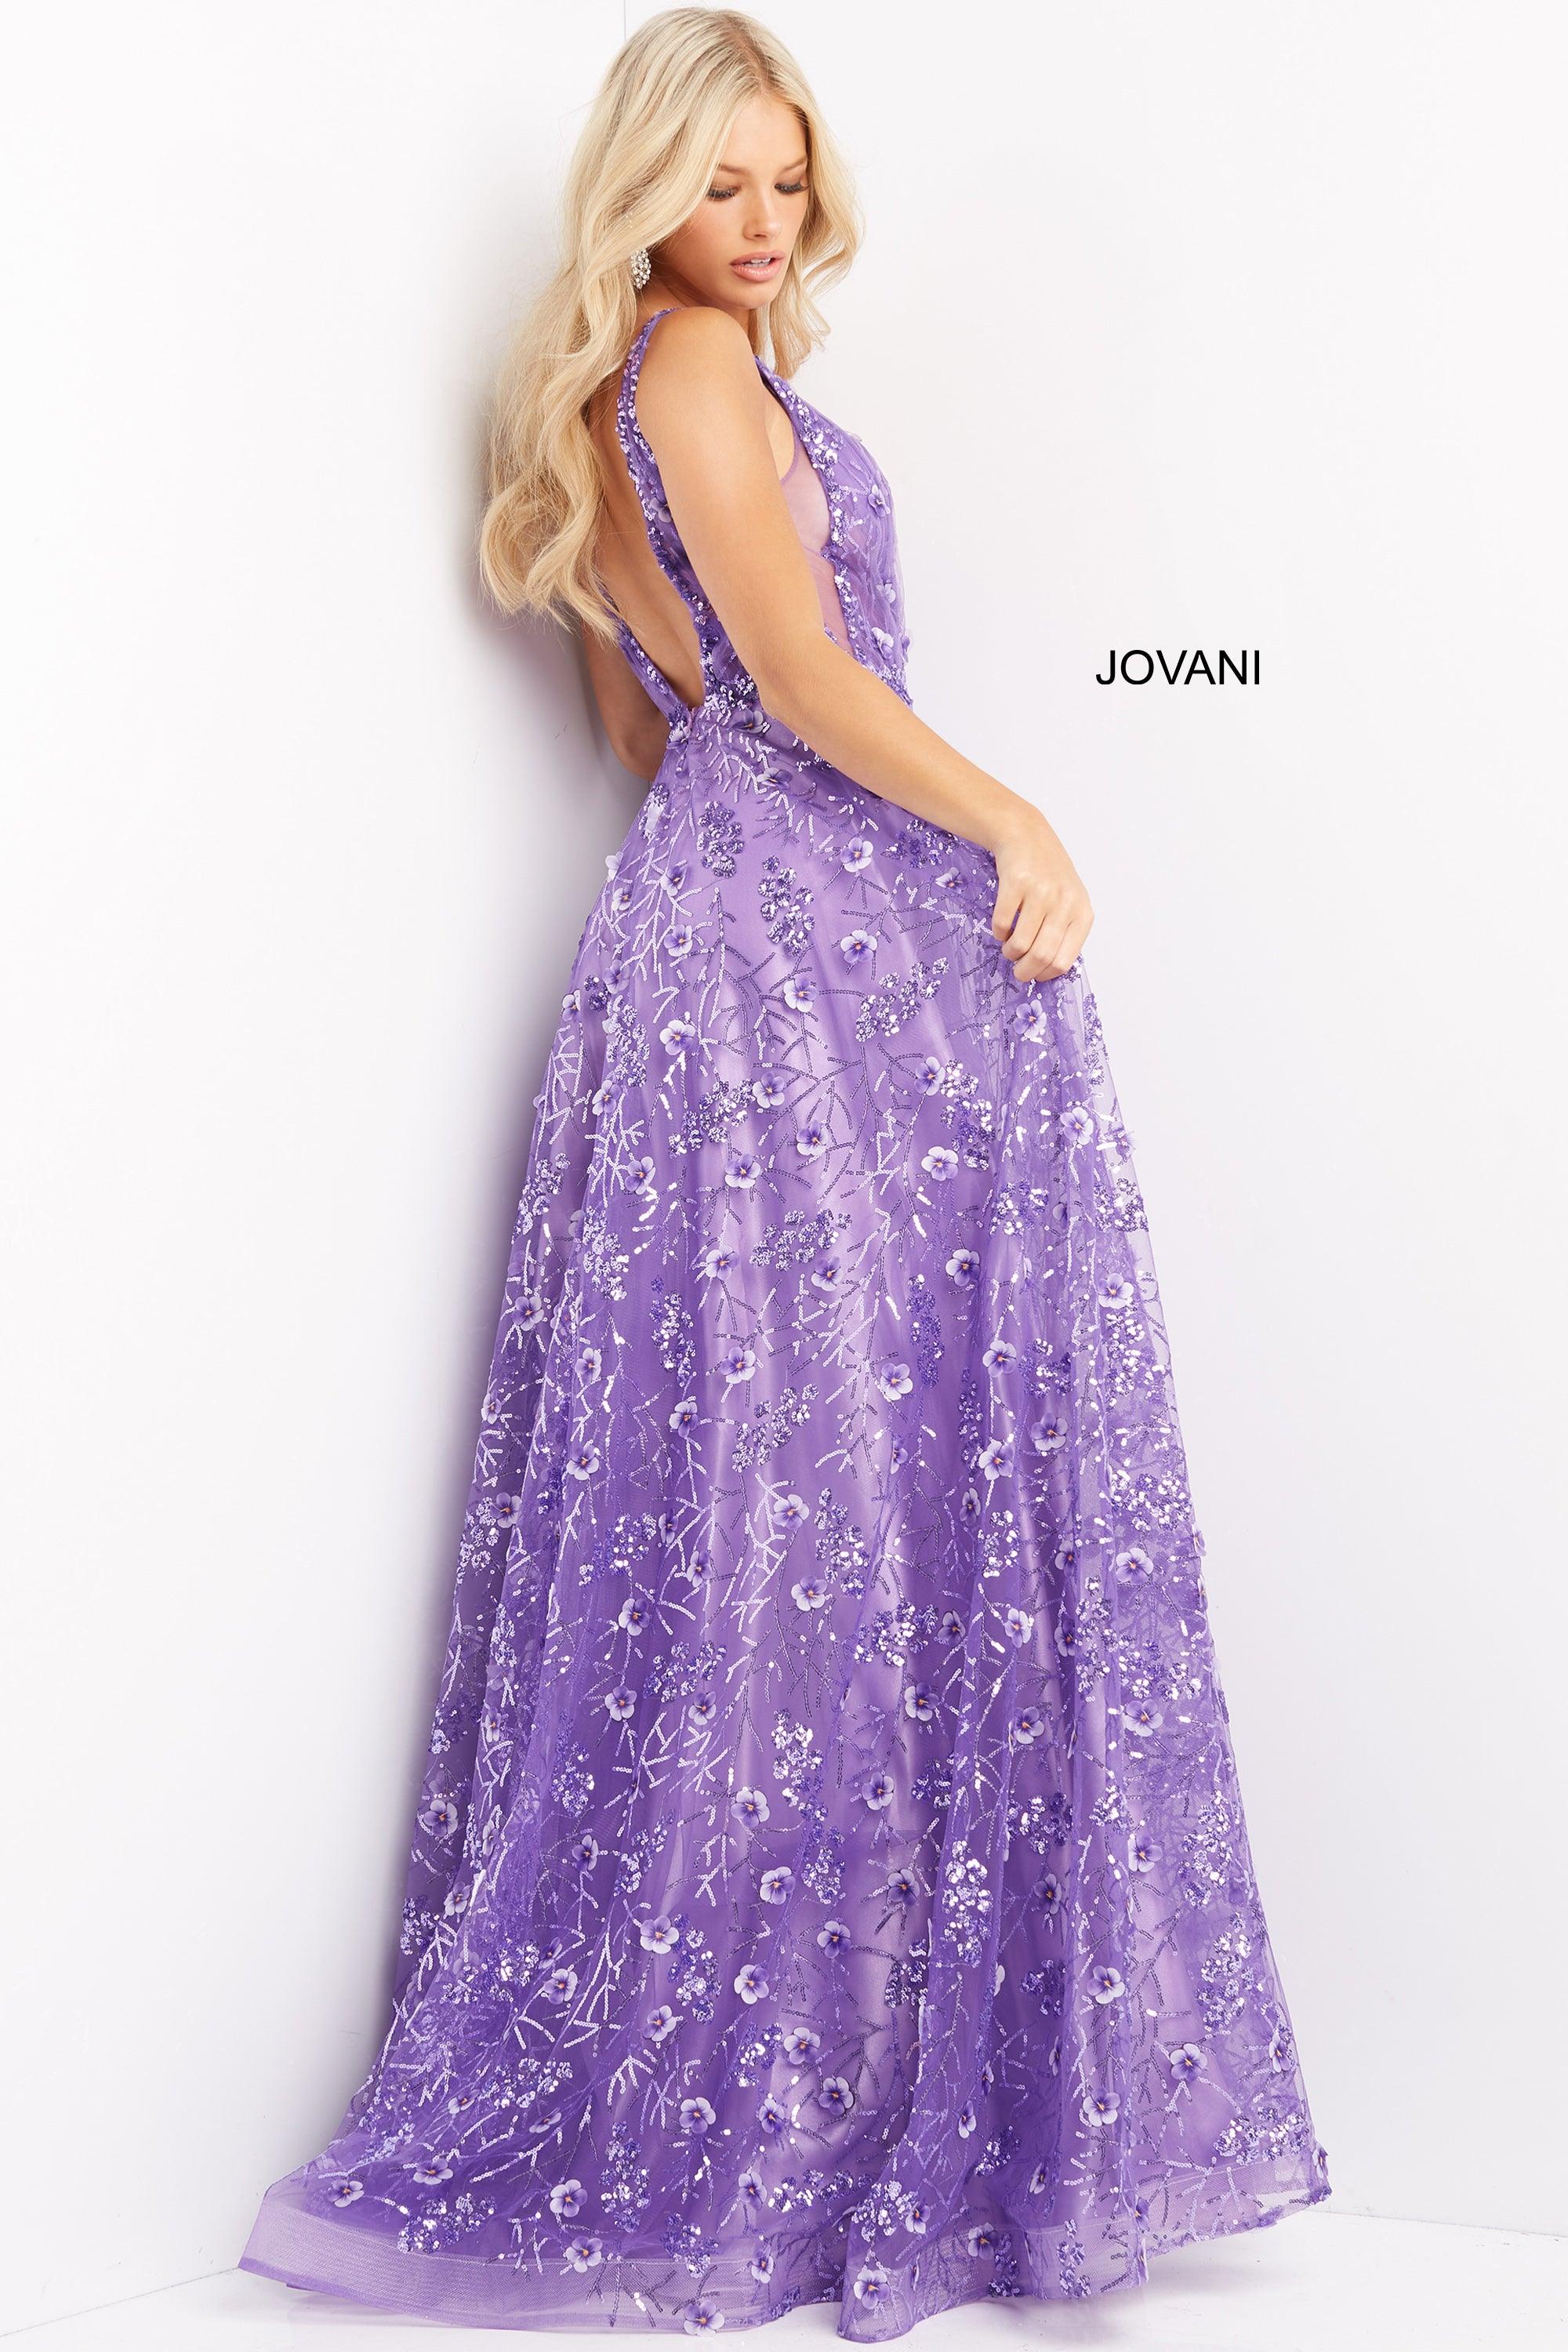 Jovani Prom Sleeveless Long Formal Gown 08422 - The Dress Outlet